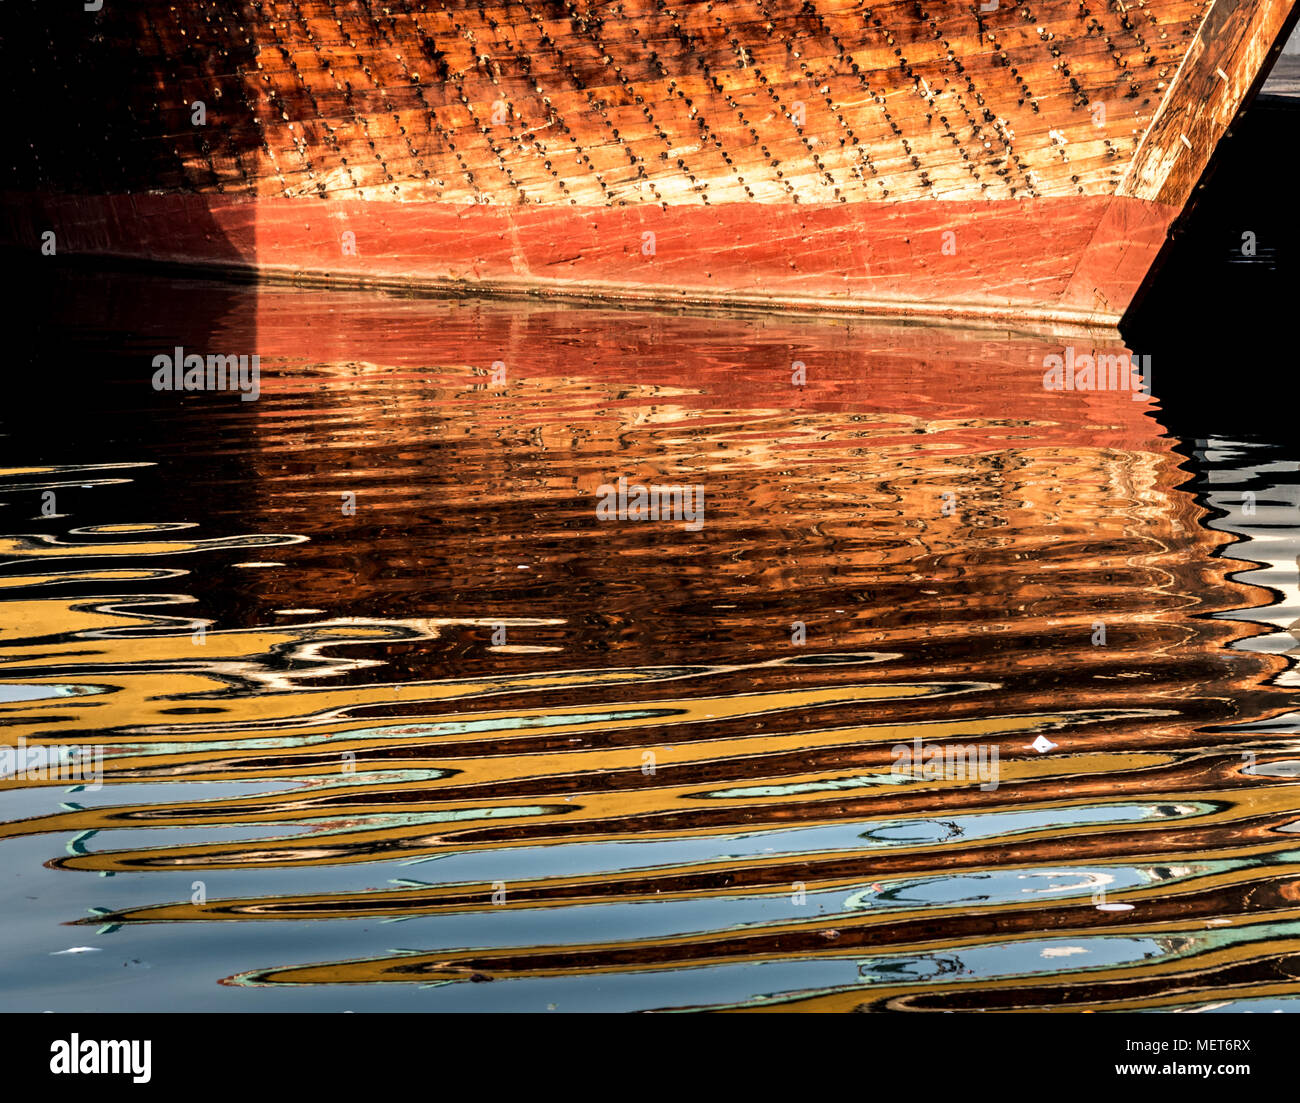 Reflectin of a wooden boat in water creating beautiful pattern. Stock Photo